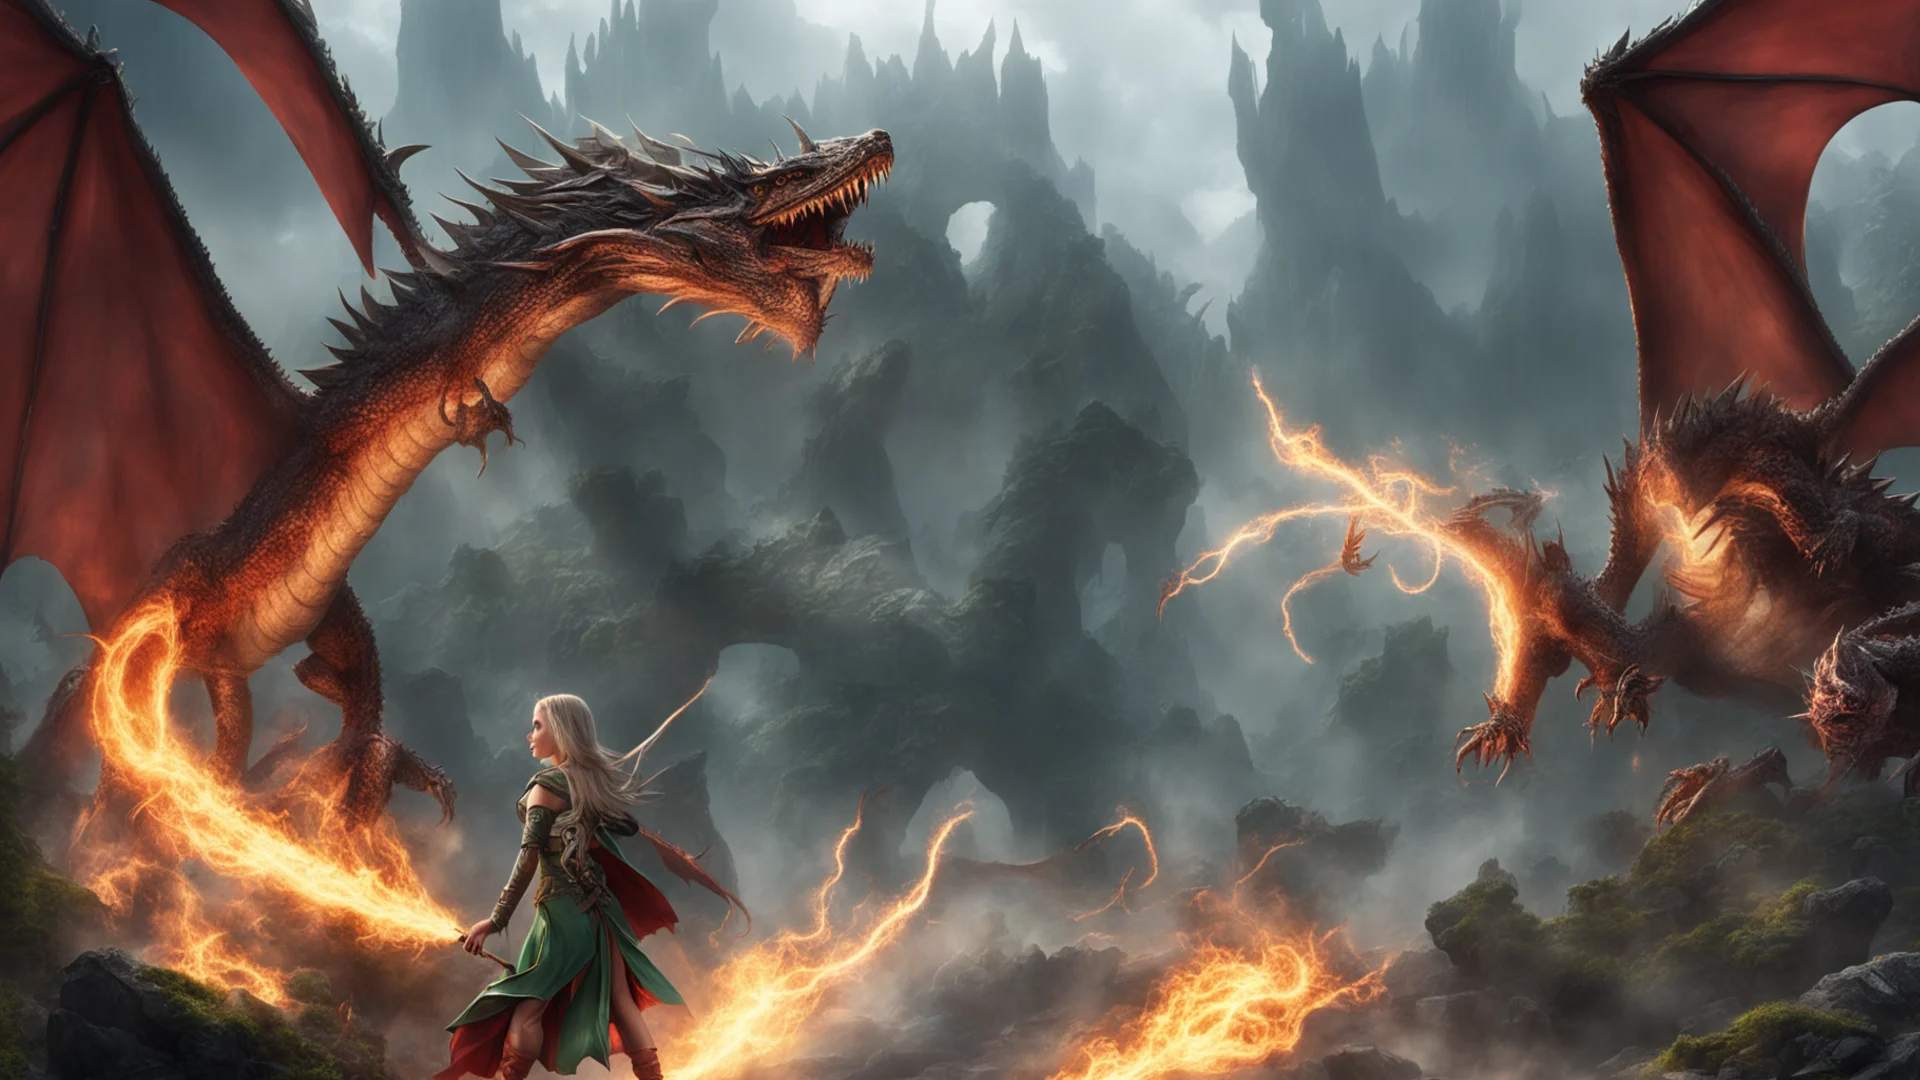 aiamazing elven princess casts a spell in front of attacking dragon awesome portrait 2 wide